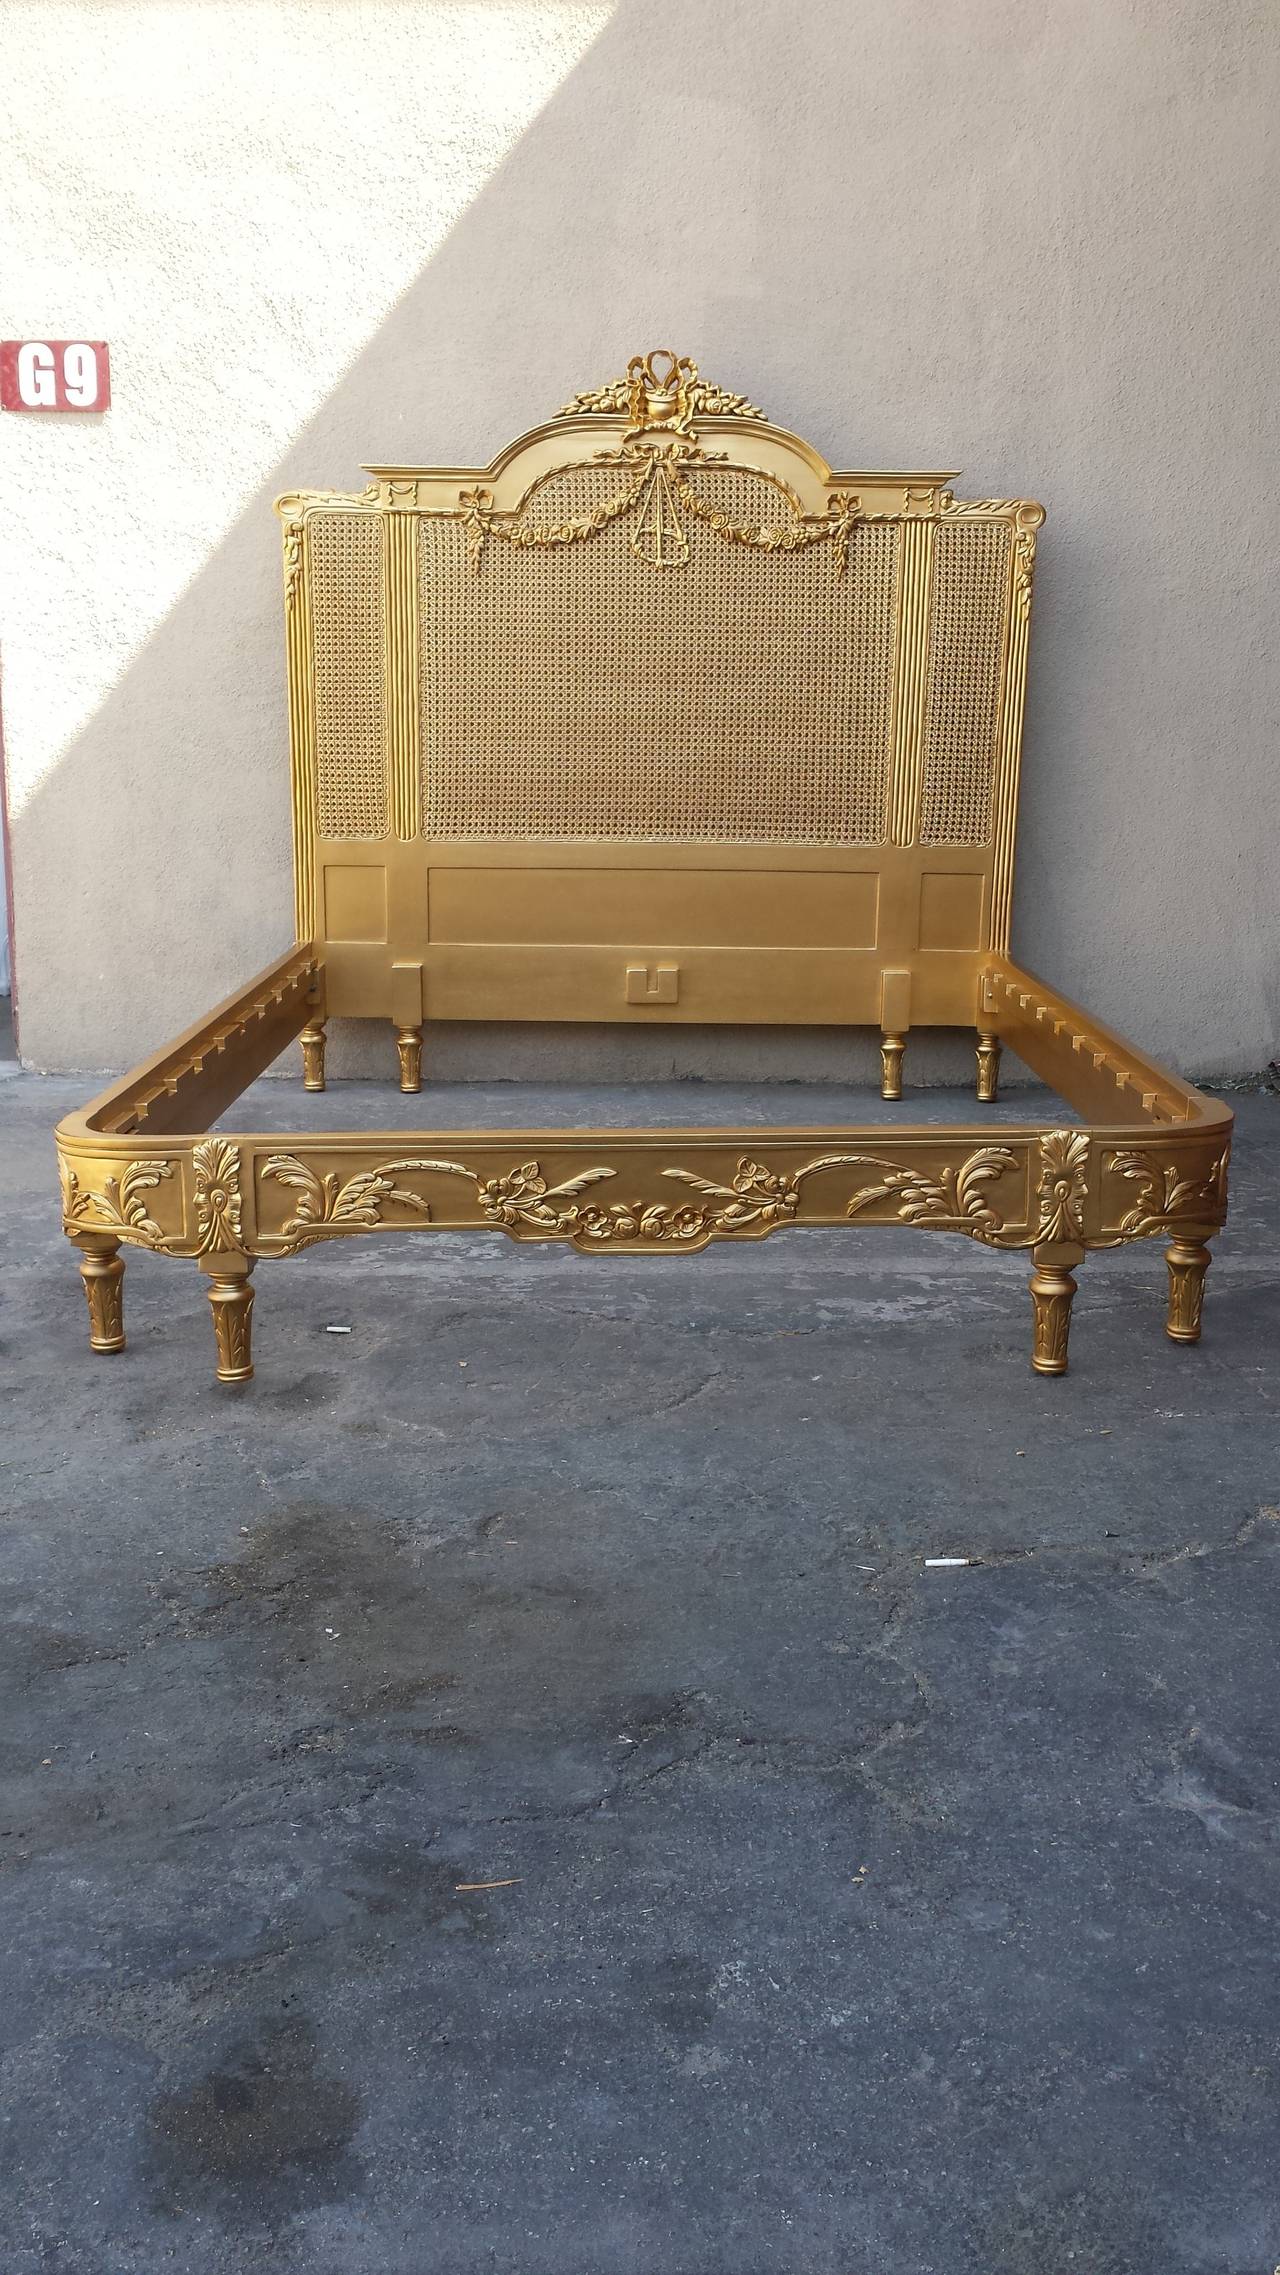 French Louis XV style bed hand carved from Mahogany wood and finished in gold. Double side cane on the headboard. This bed will accommodate any standard Queen size mattress. The bed comes with slats across and center support rail, not shown.